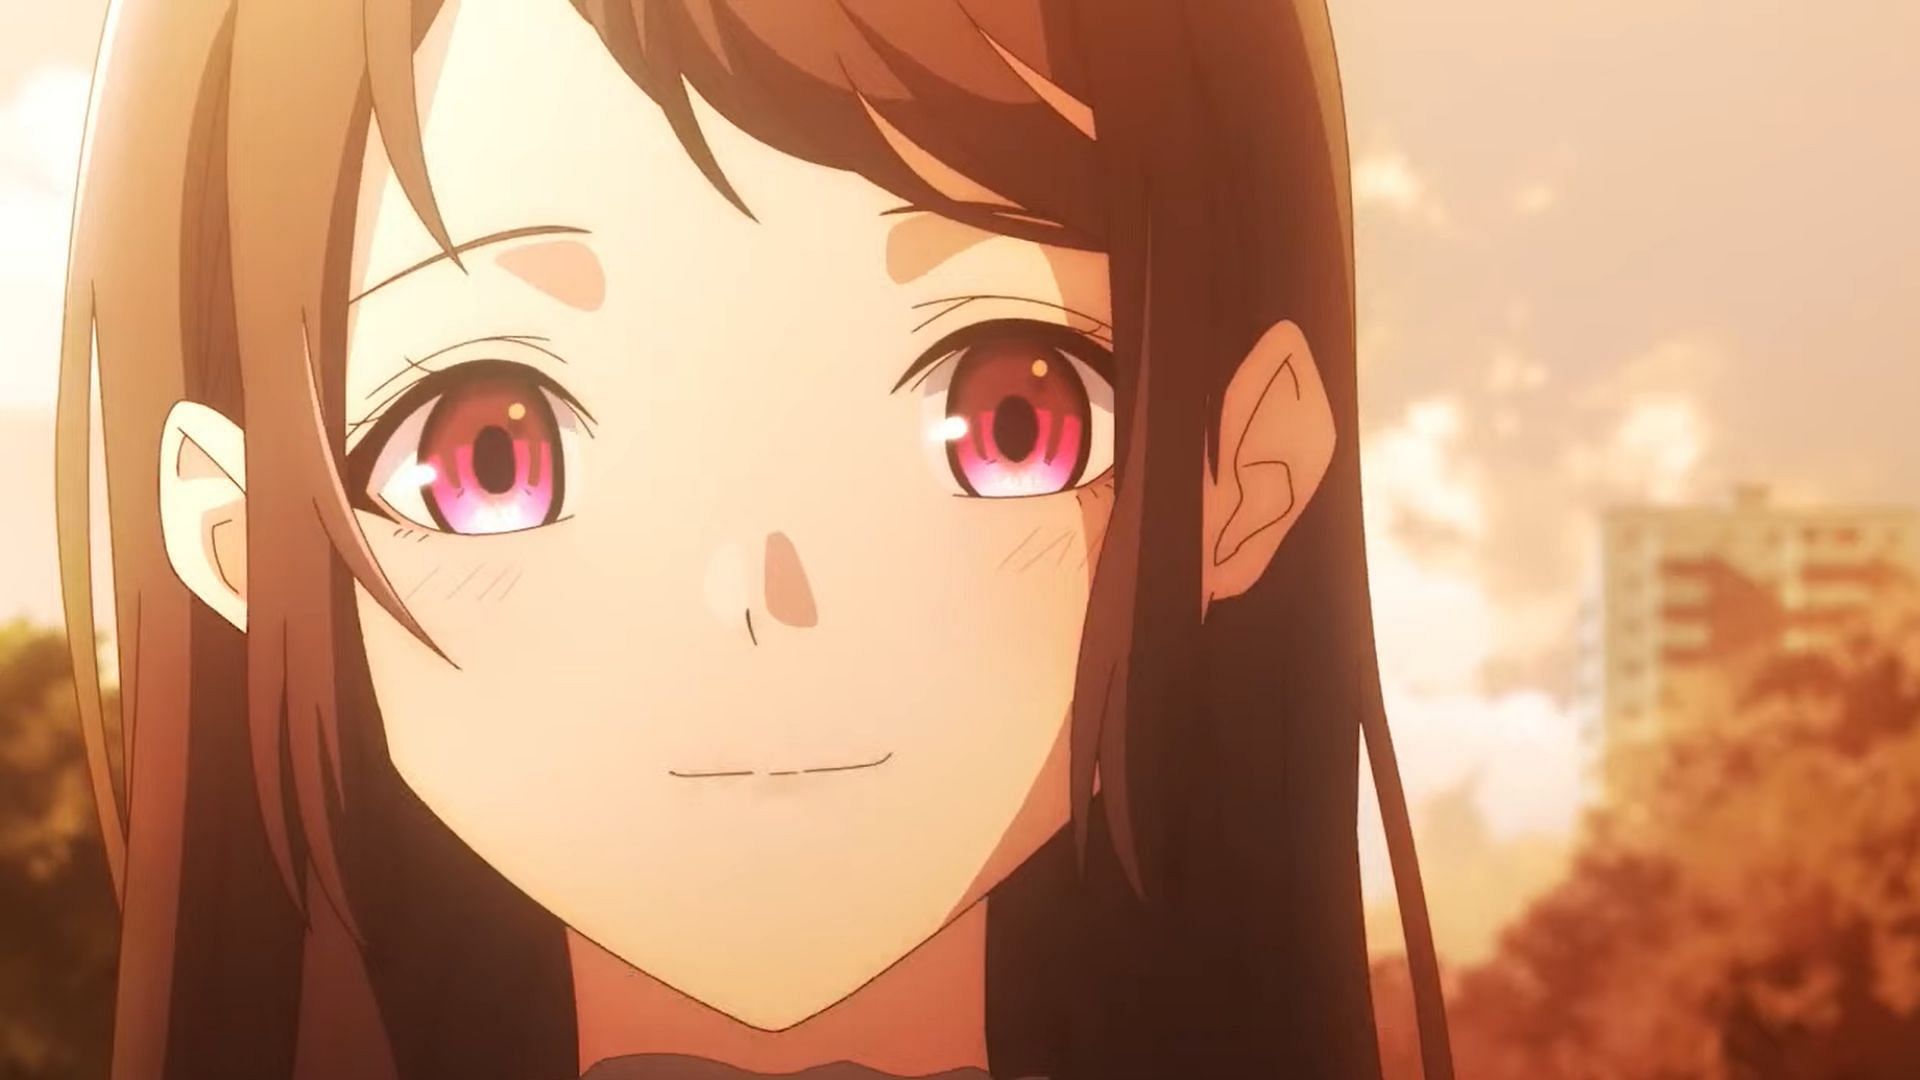 Kaori as seen in I Got a Cheat Skill in another world episode 5 (Image via Millepensee)